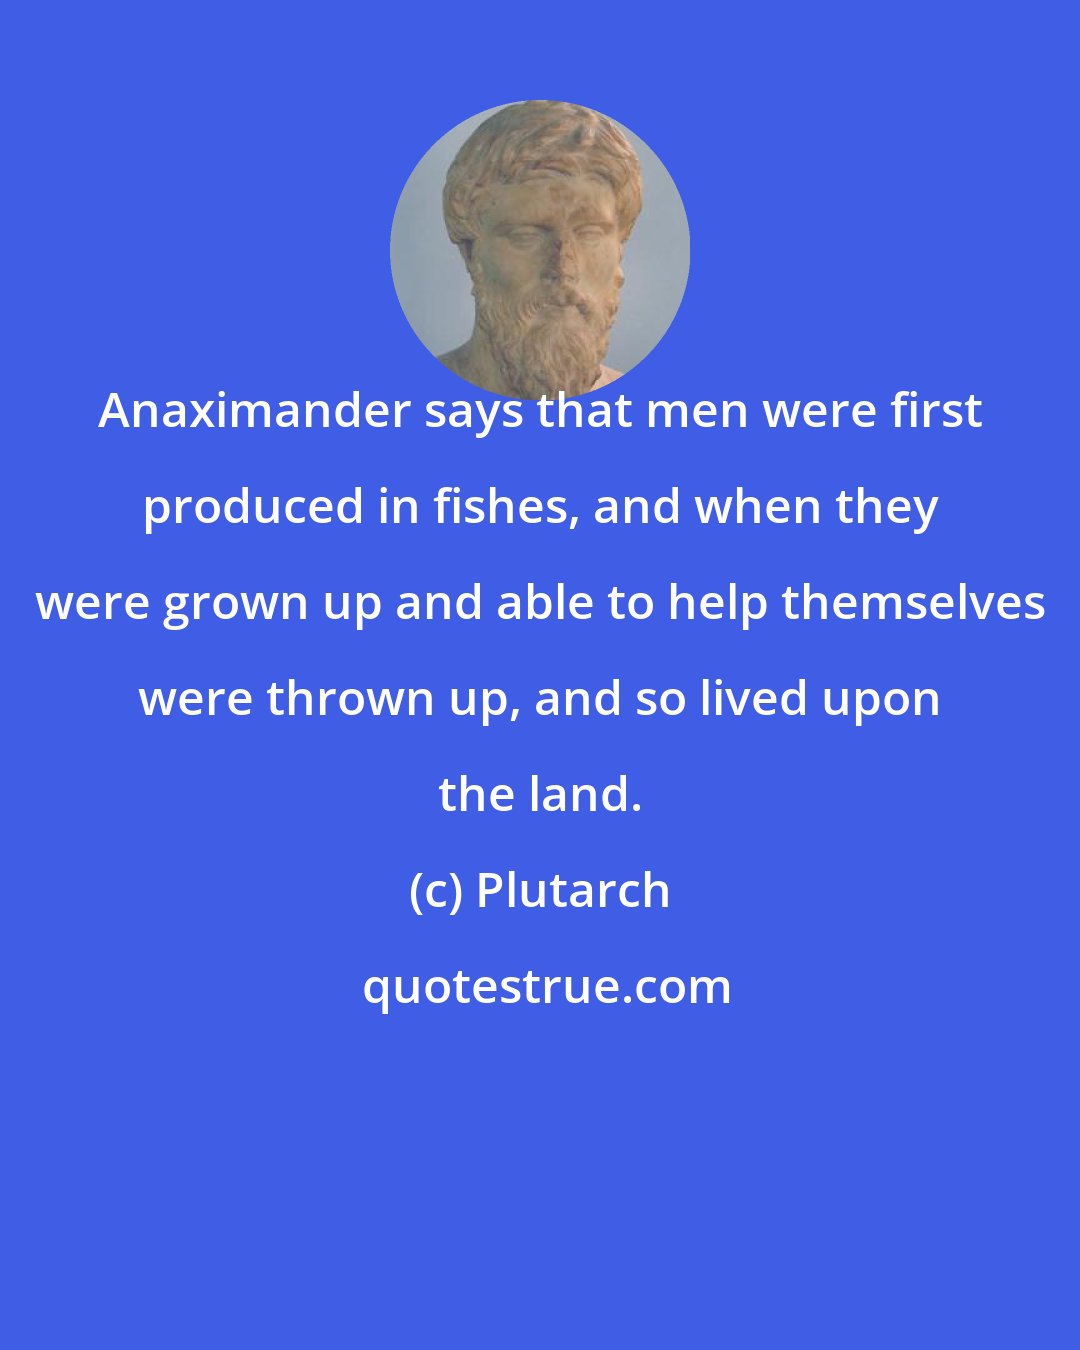 Plutarch: Anaximander says that men were first produced in fishes, and when they were grown up and able to help themselves were thrown up, and so lived upon the land.